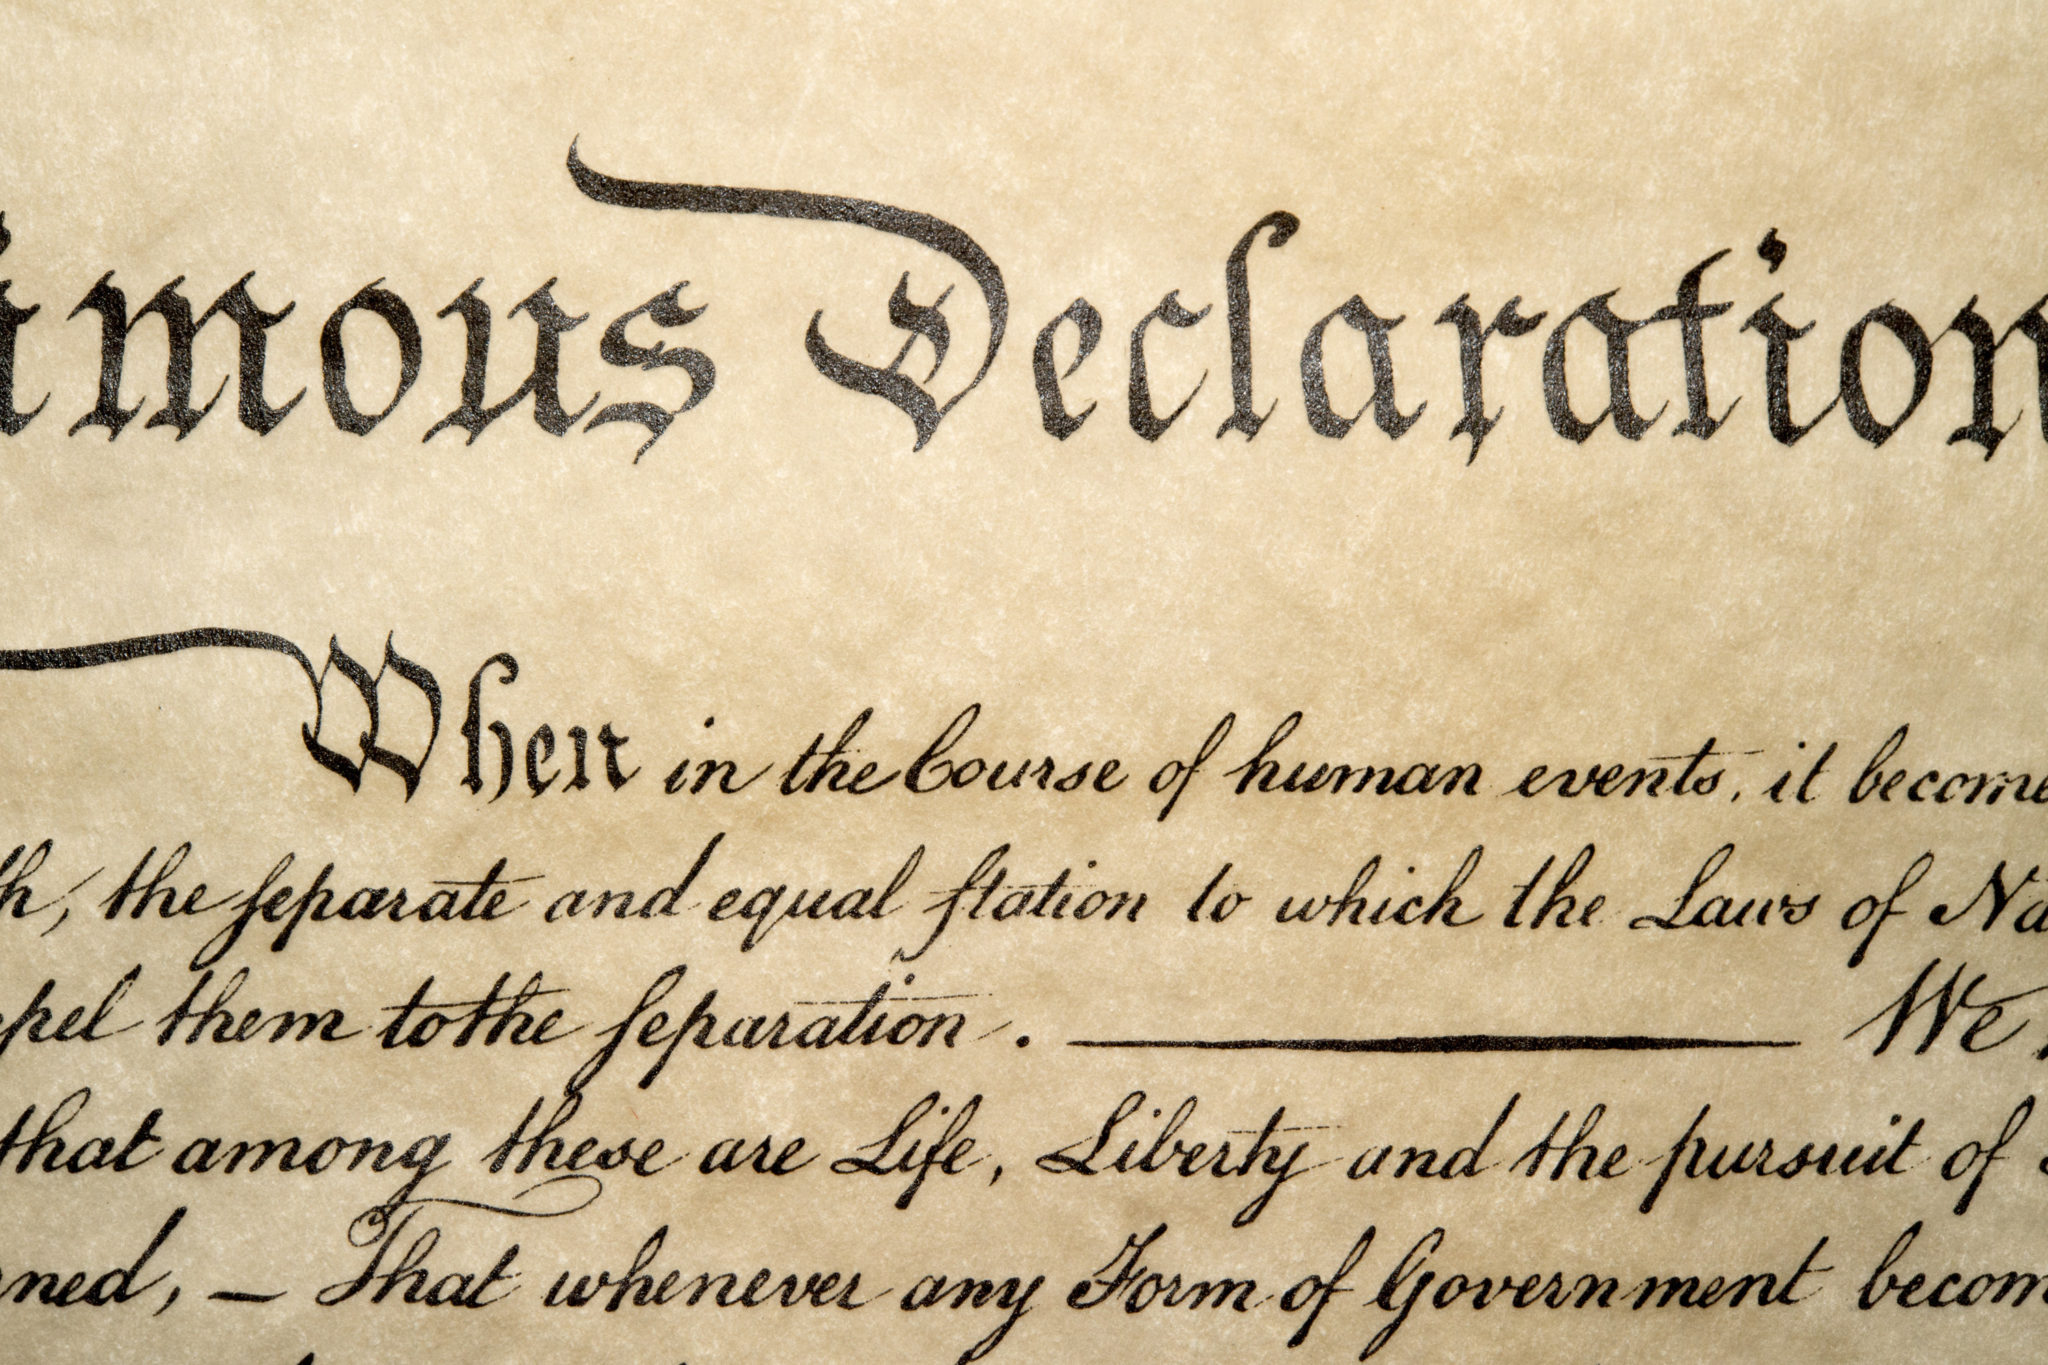 Declaration of Independence - We Hold These Truths to be Self-Evident